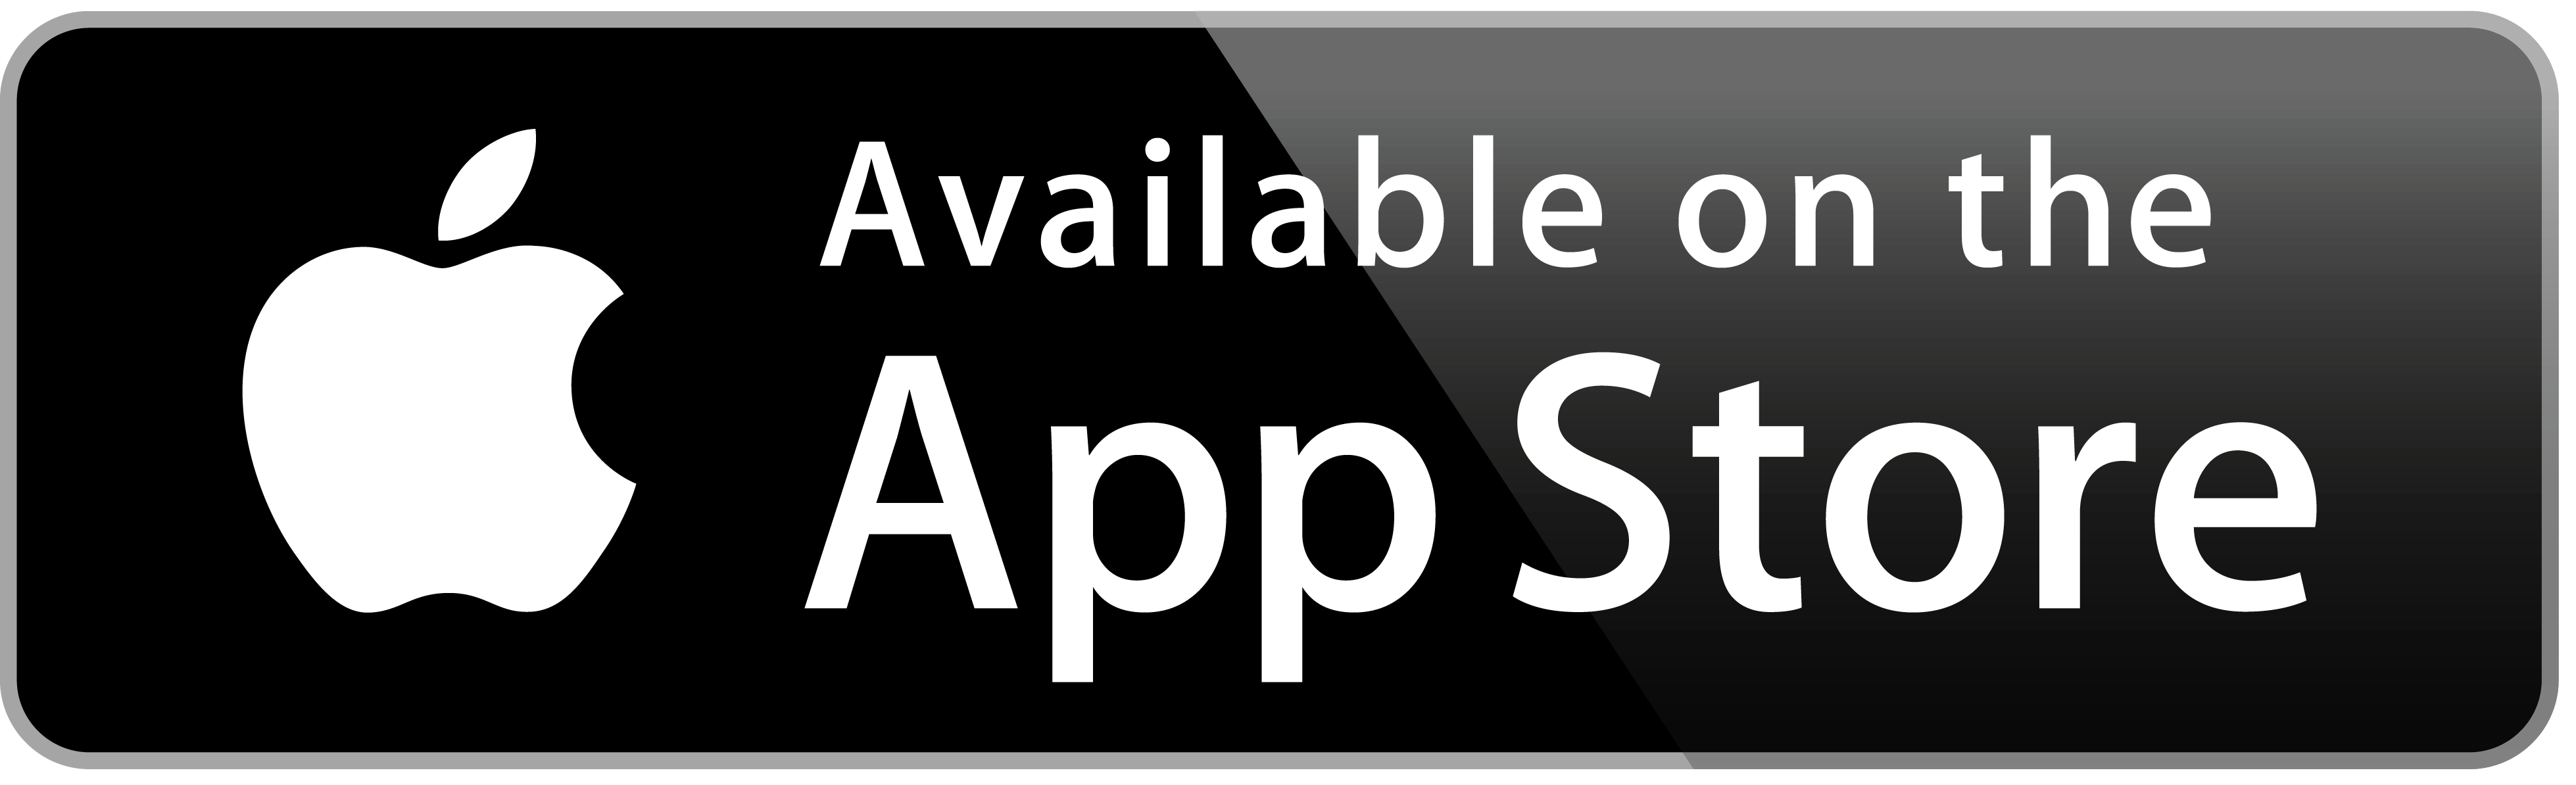 Are You A Patient - SnapPrescriptN  Mobile App Available on 